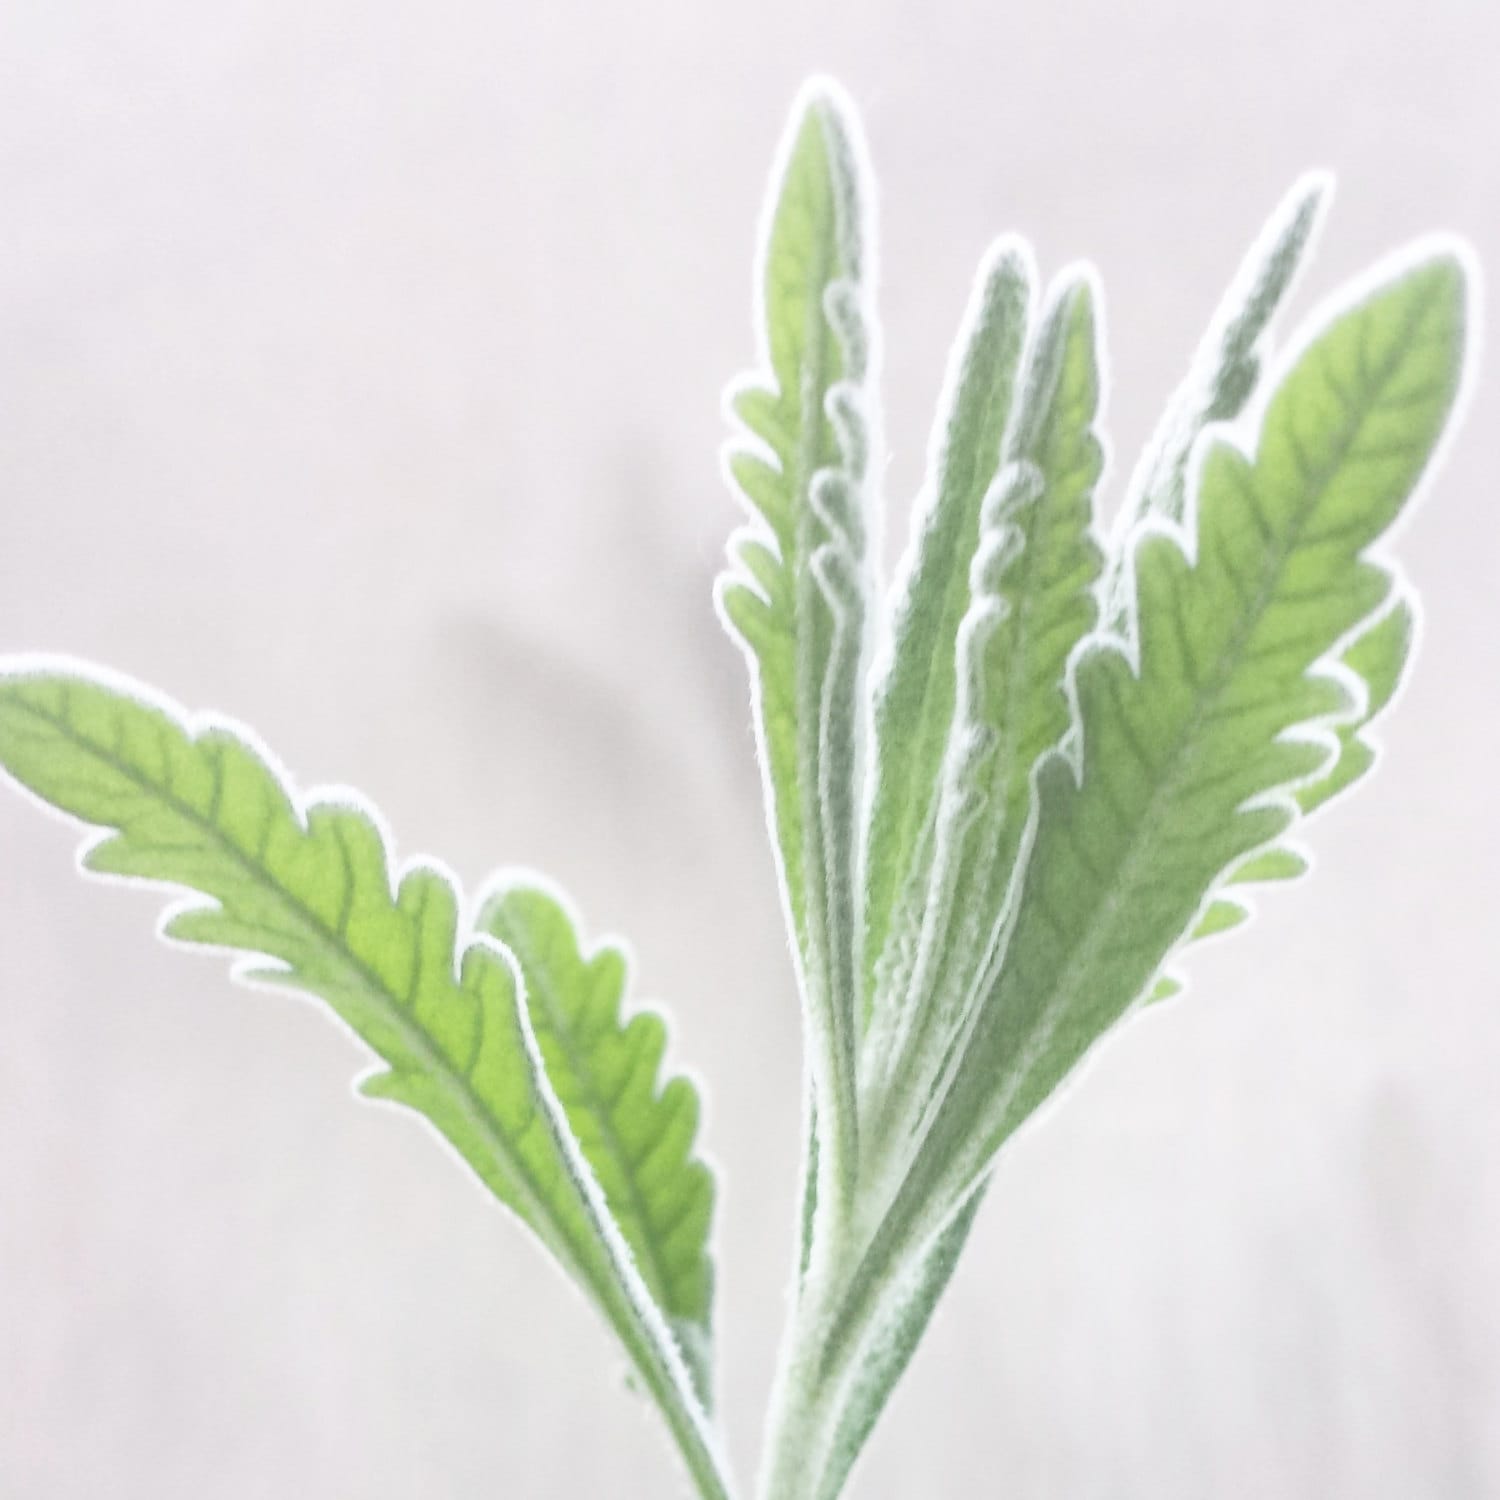 the leaves of a lavender sprout